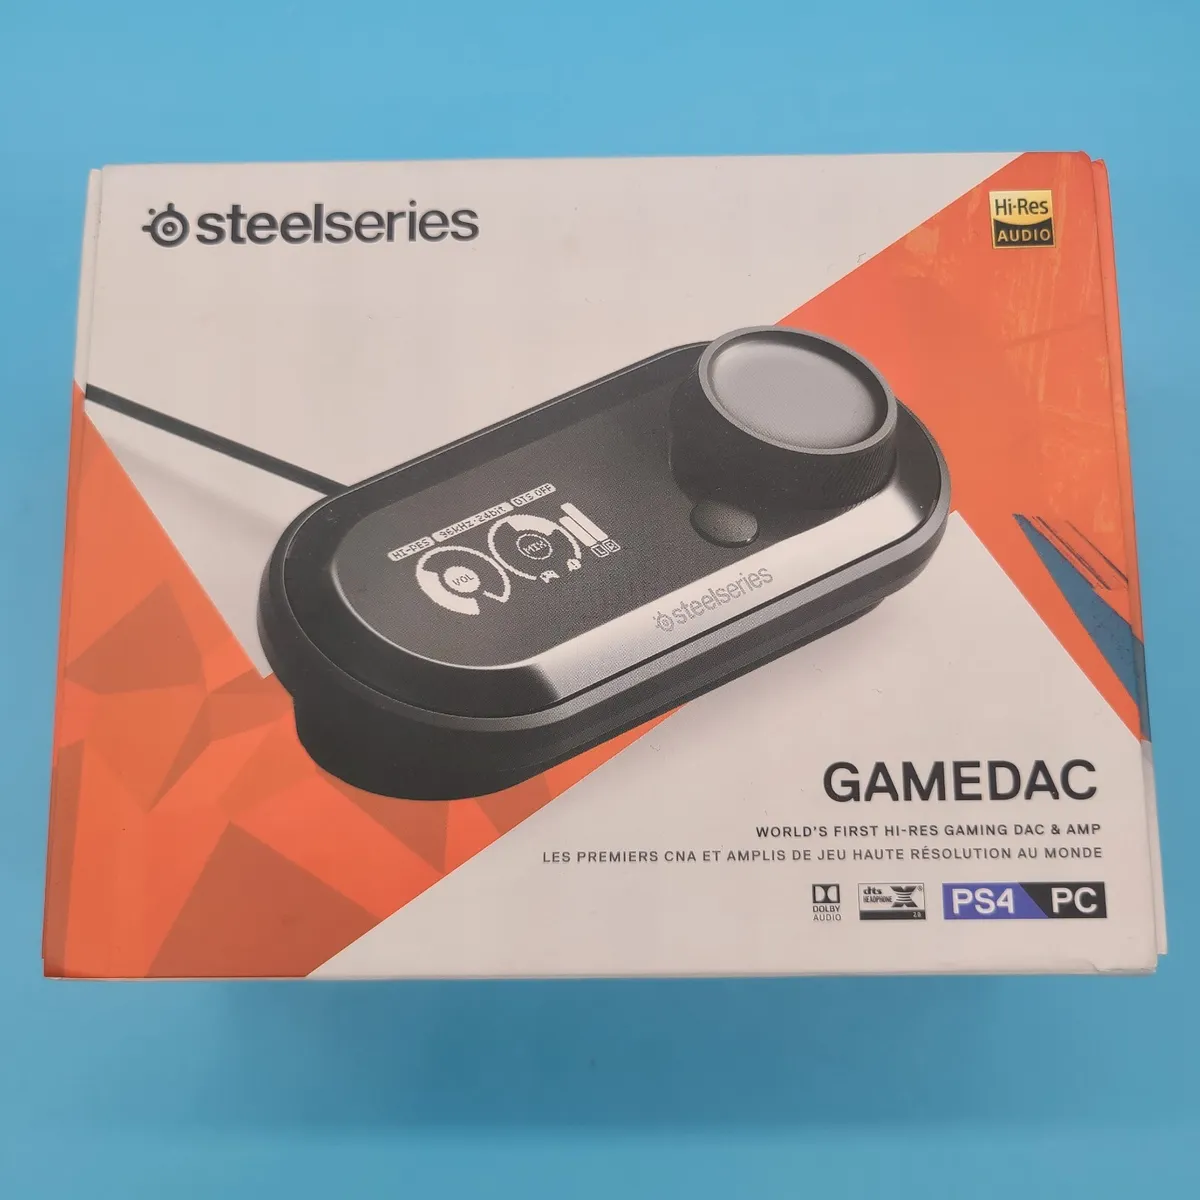 Steelseries GameDac Certified Hi-Res Gaming DAC & Amp For Ps4 & PC.